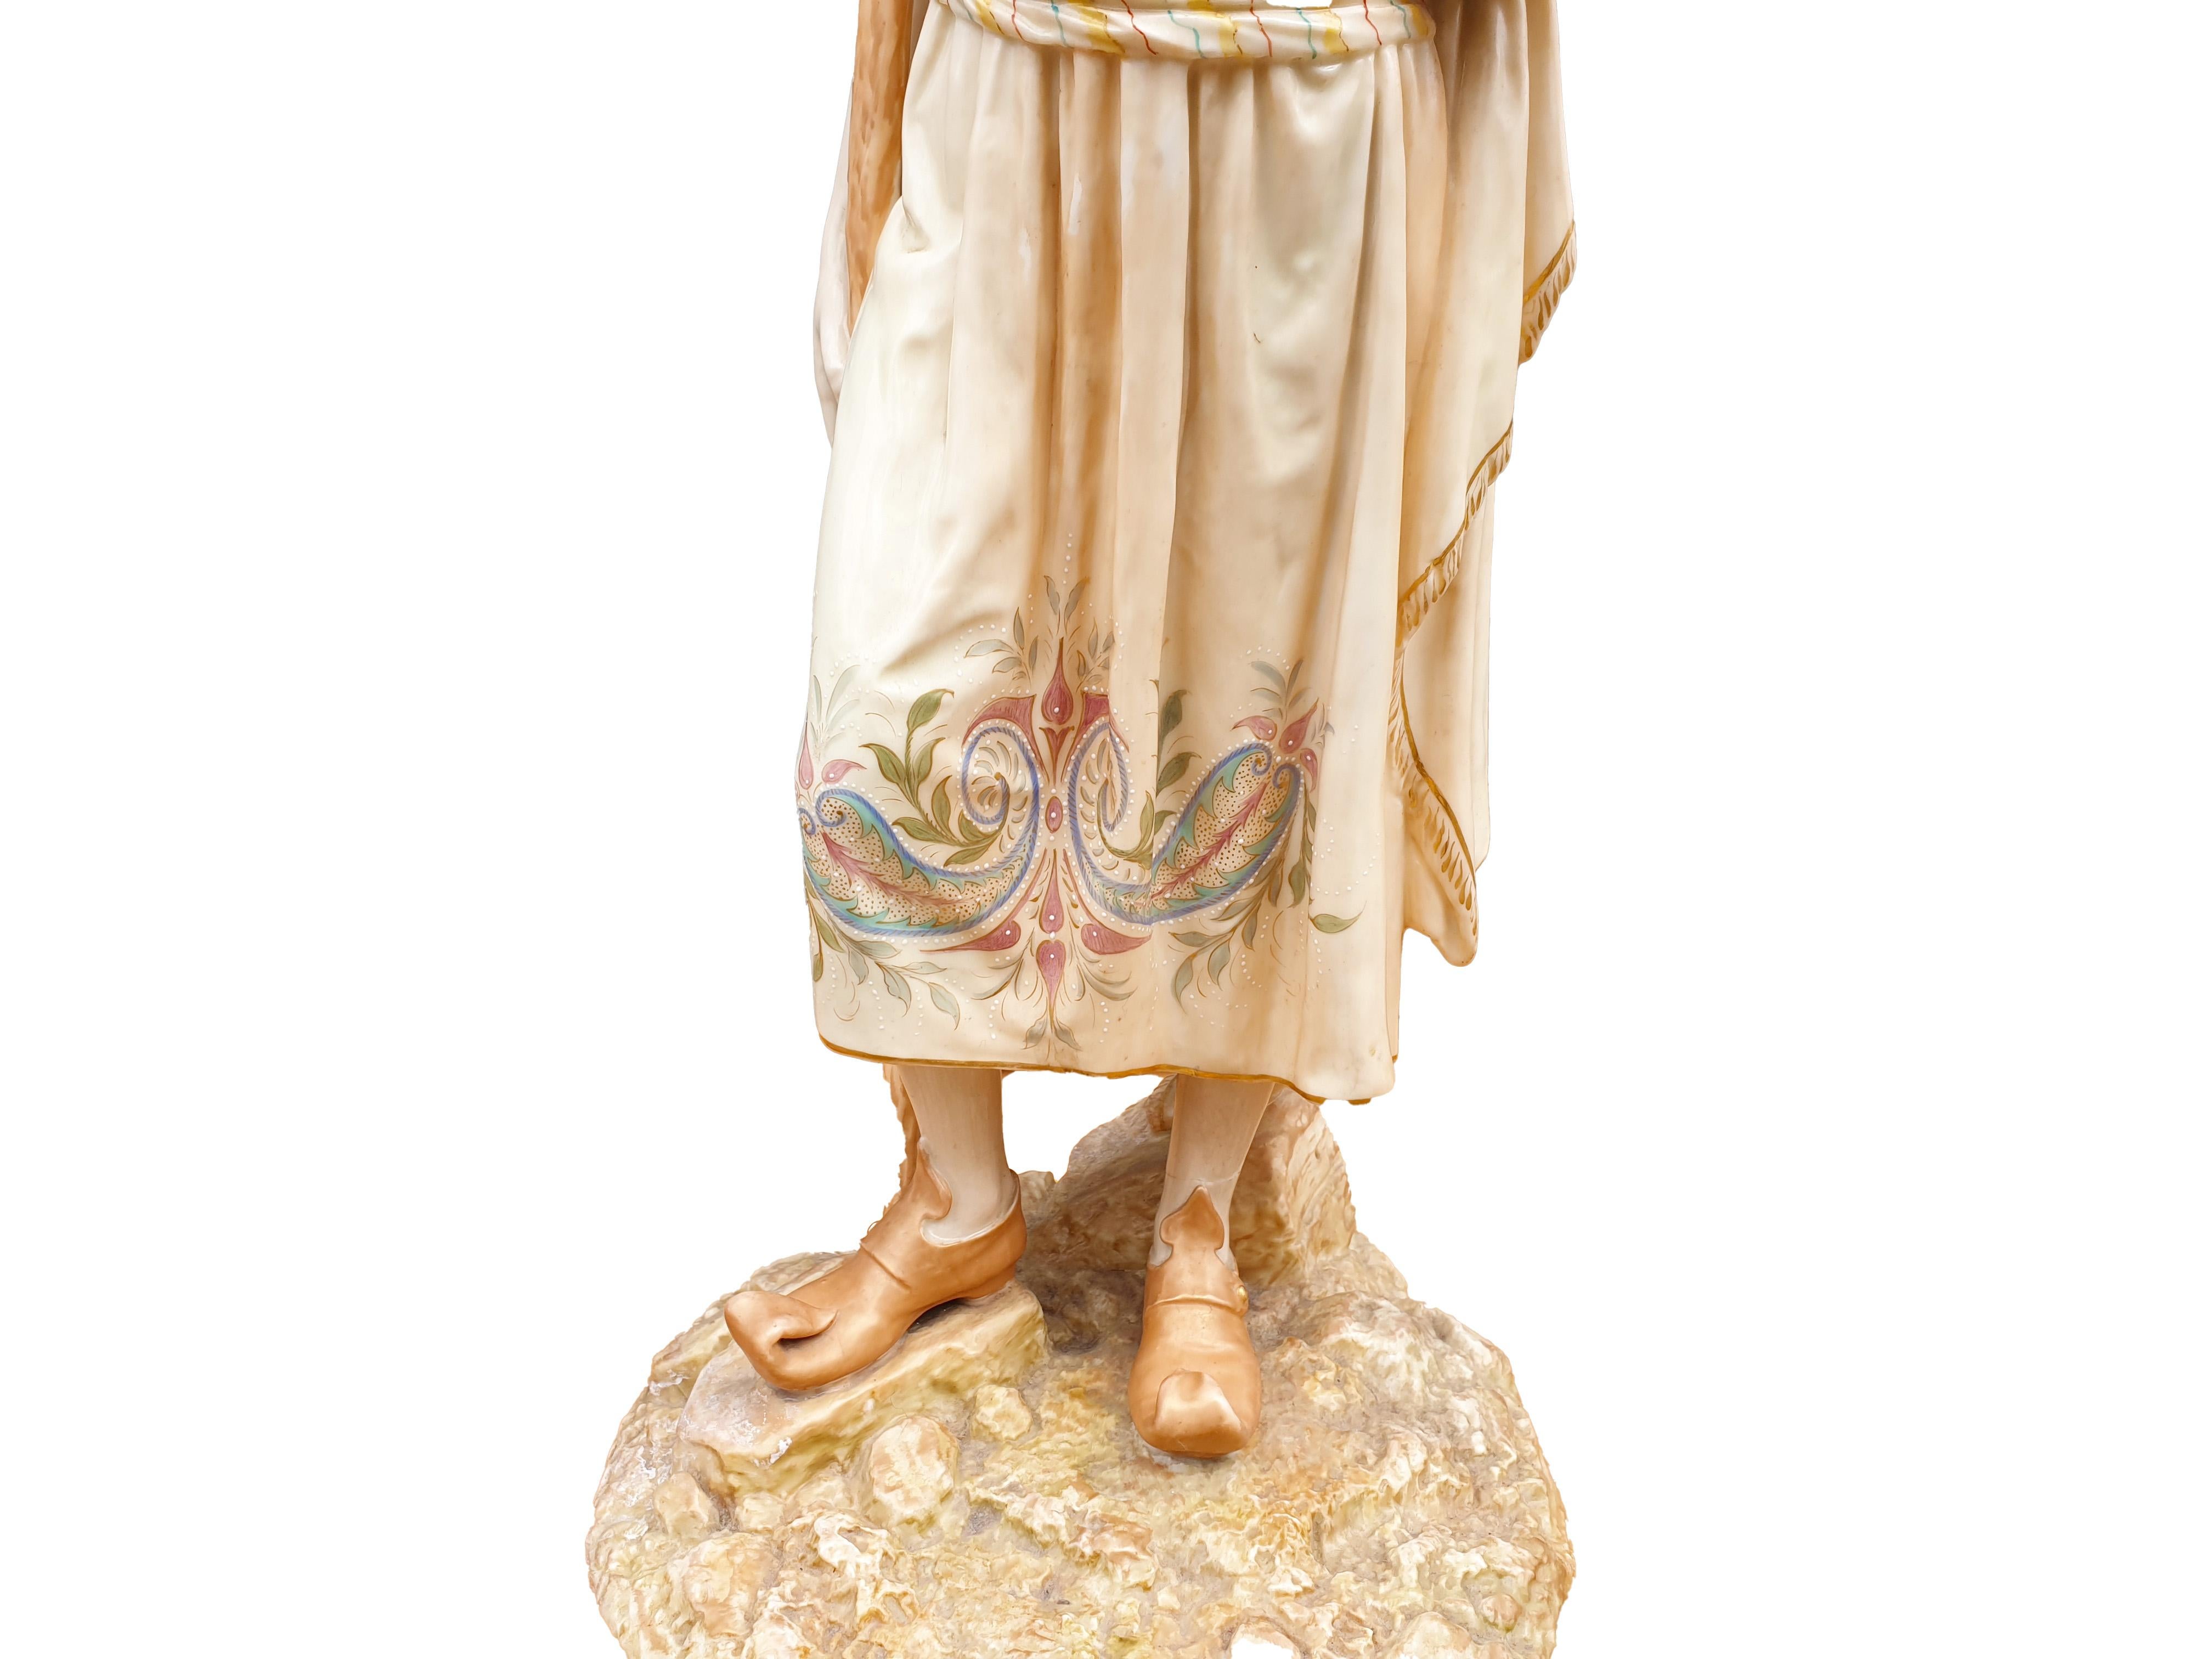 English Royal Worcester Shepherdess Figure Signed by James Hadley For Sale